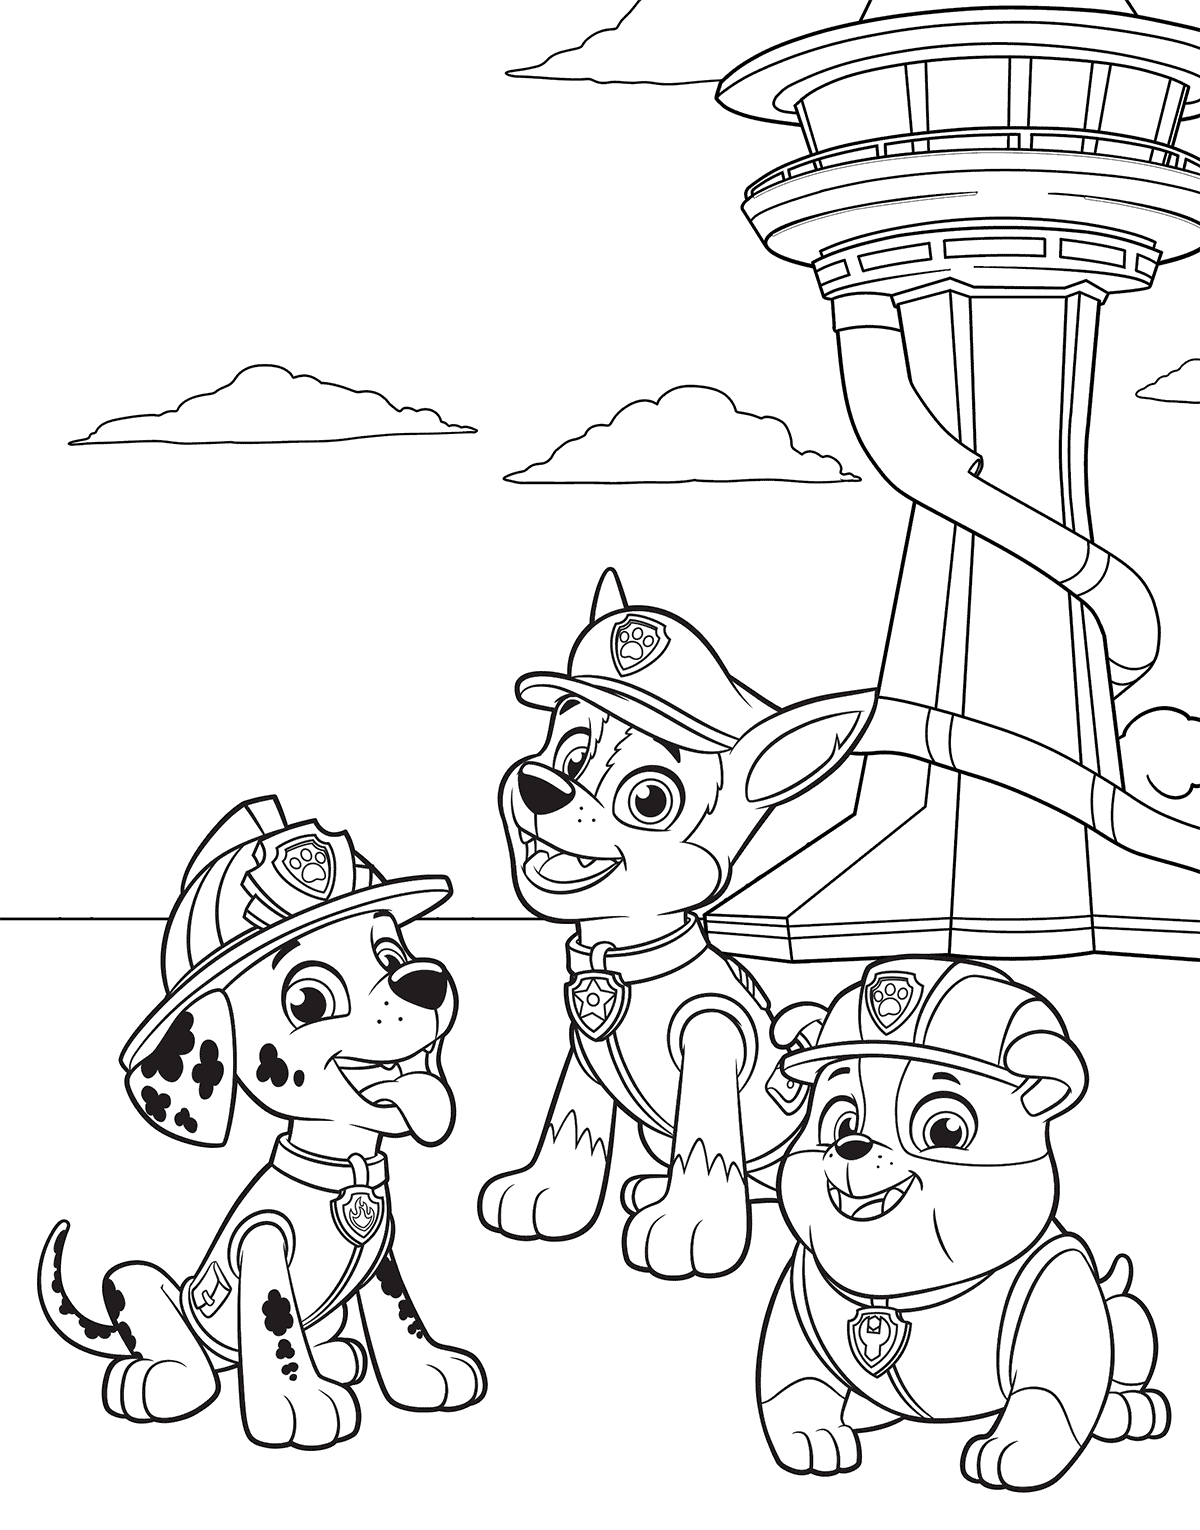 PAW Patrol In Adventure Bay Coloring Page